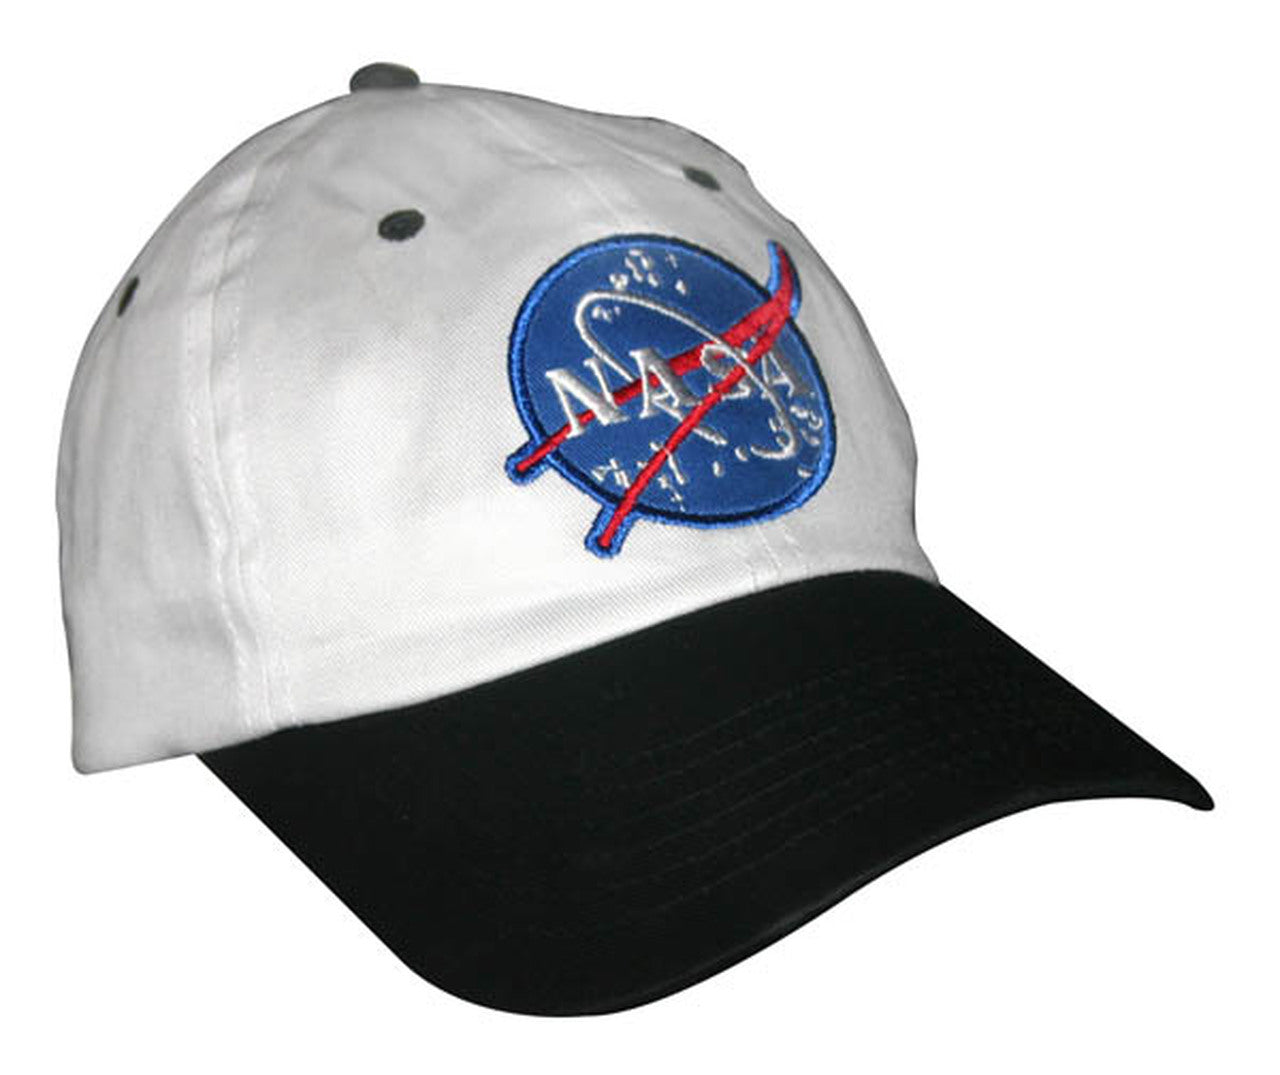 Jr. Astronaut Suit with Embroidered Cap